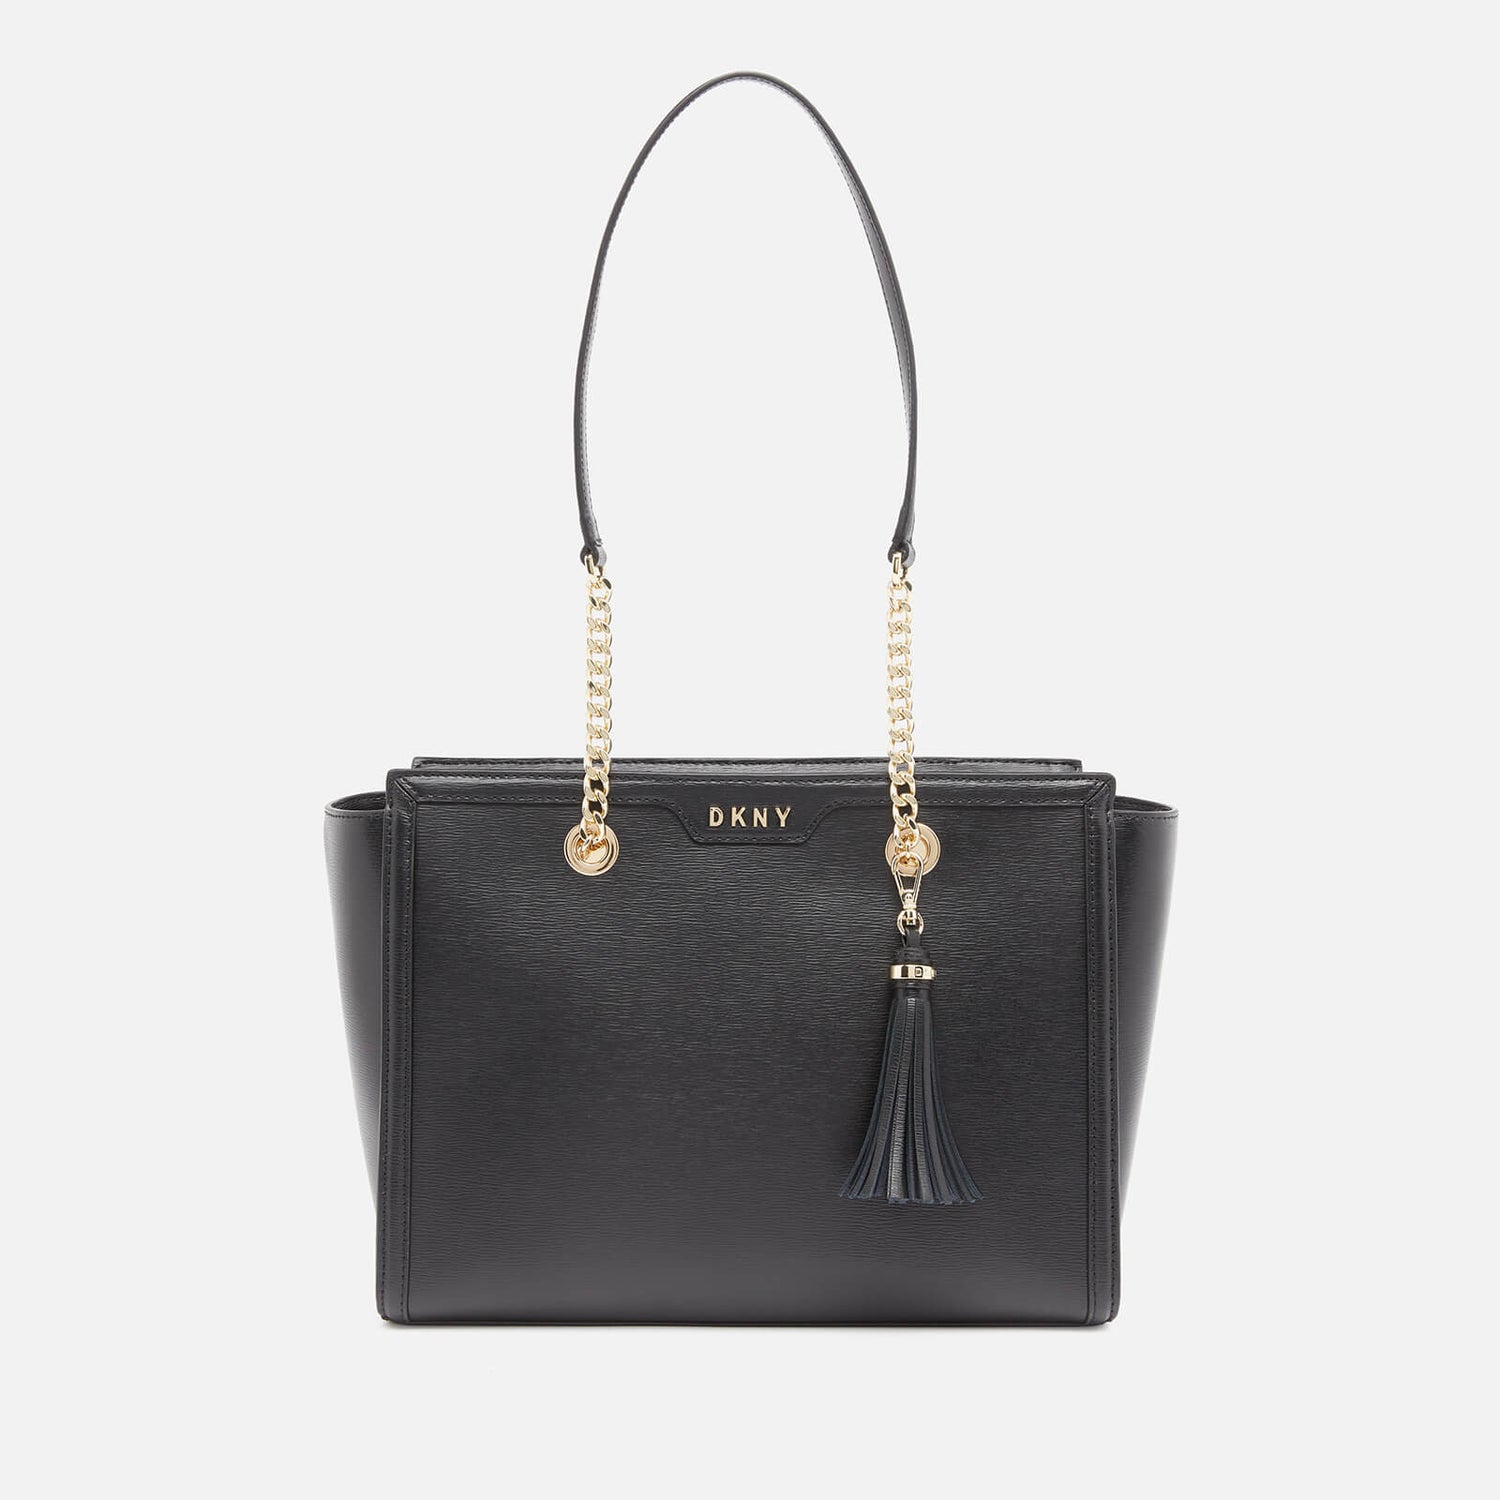 DKNY Women's Polly Sutton Tote Bag - Black/Gold BGD